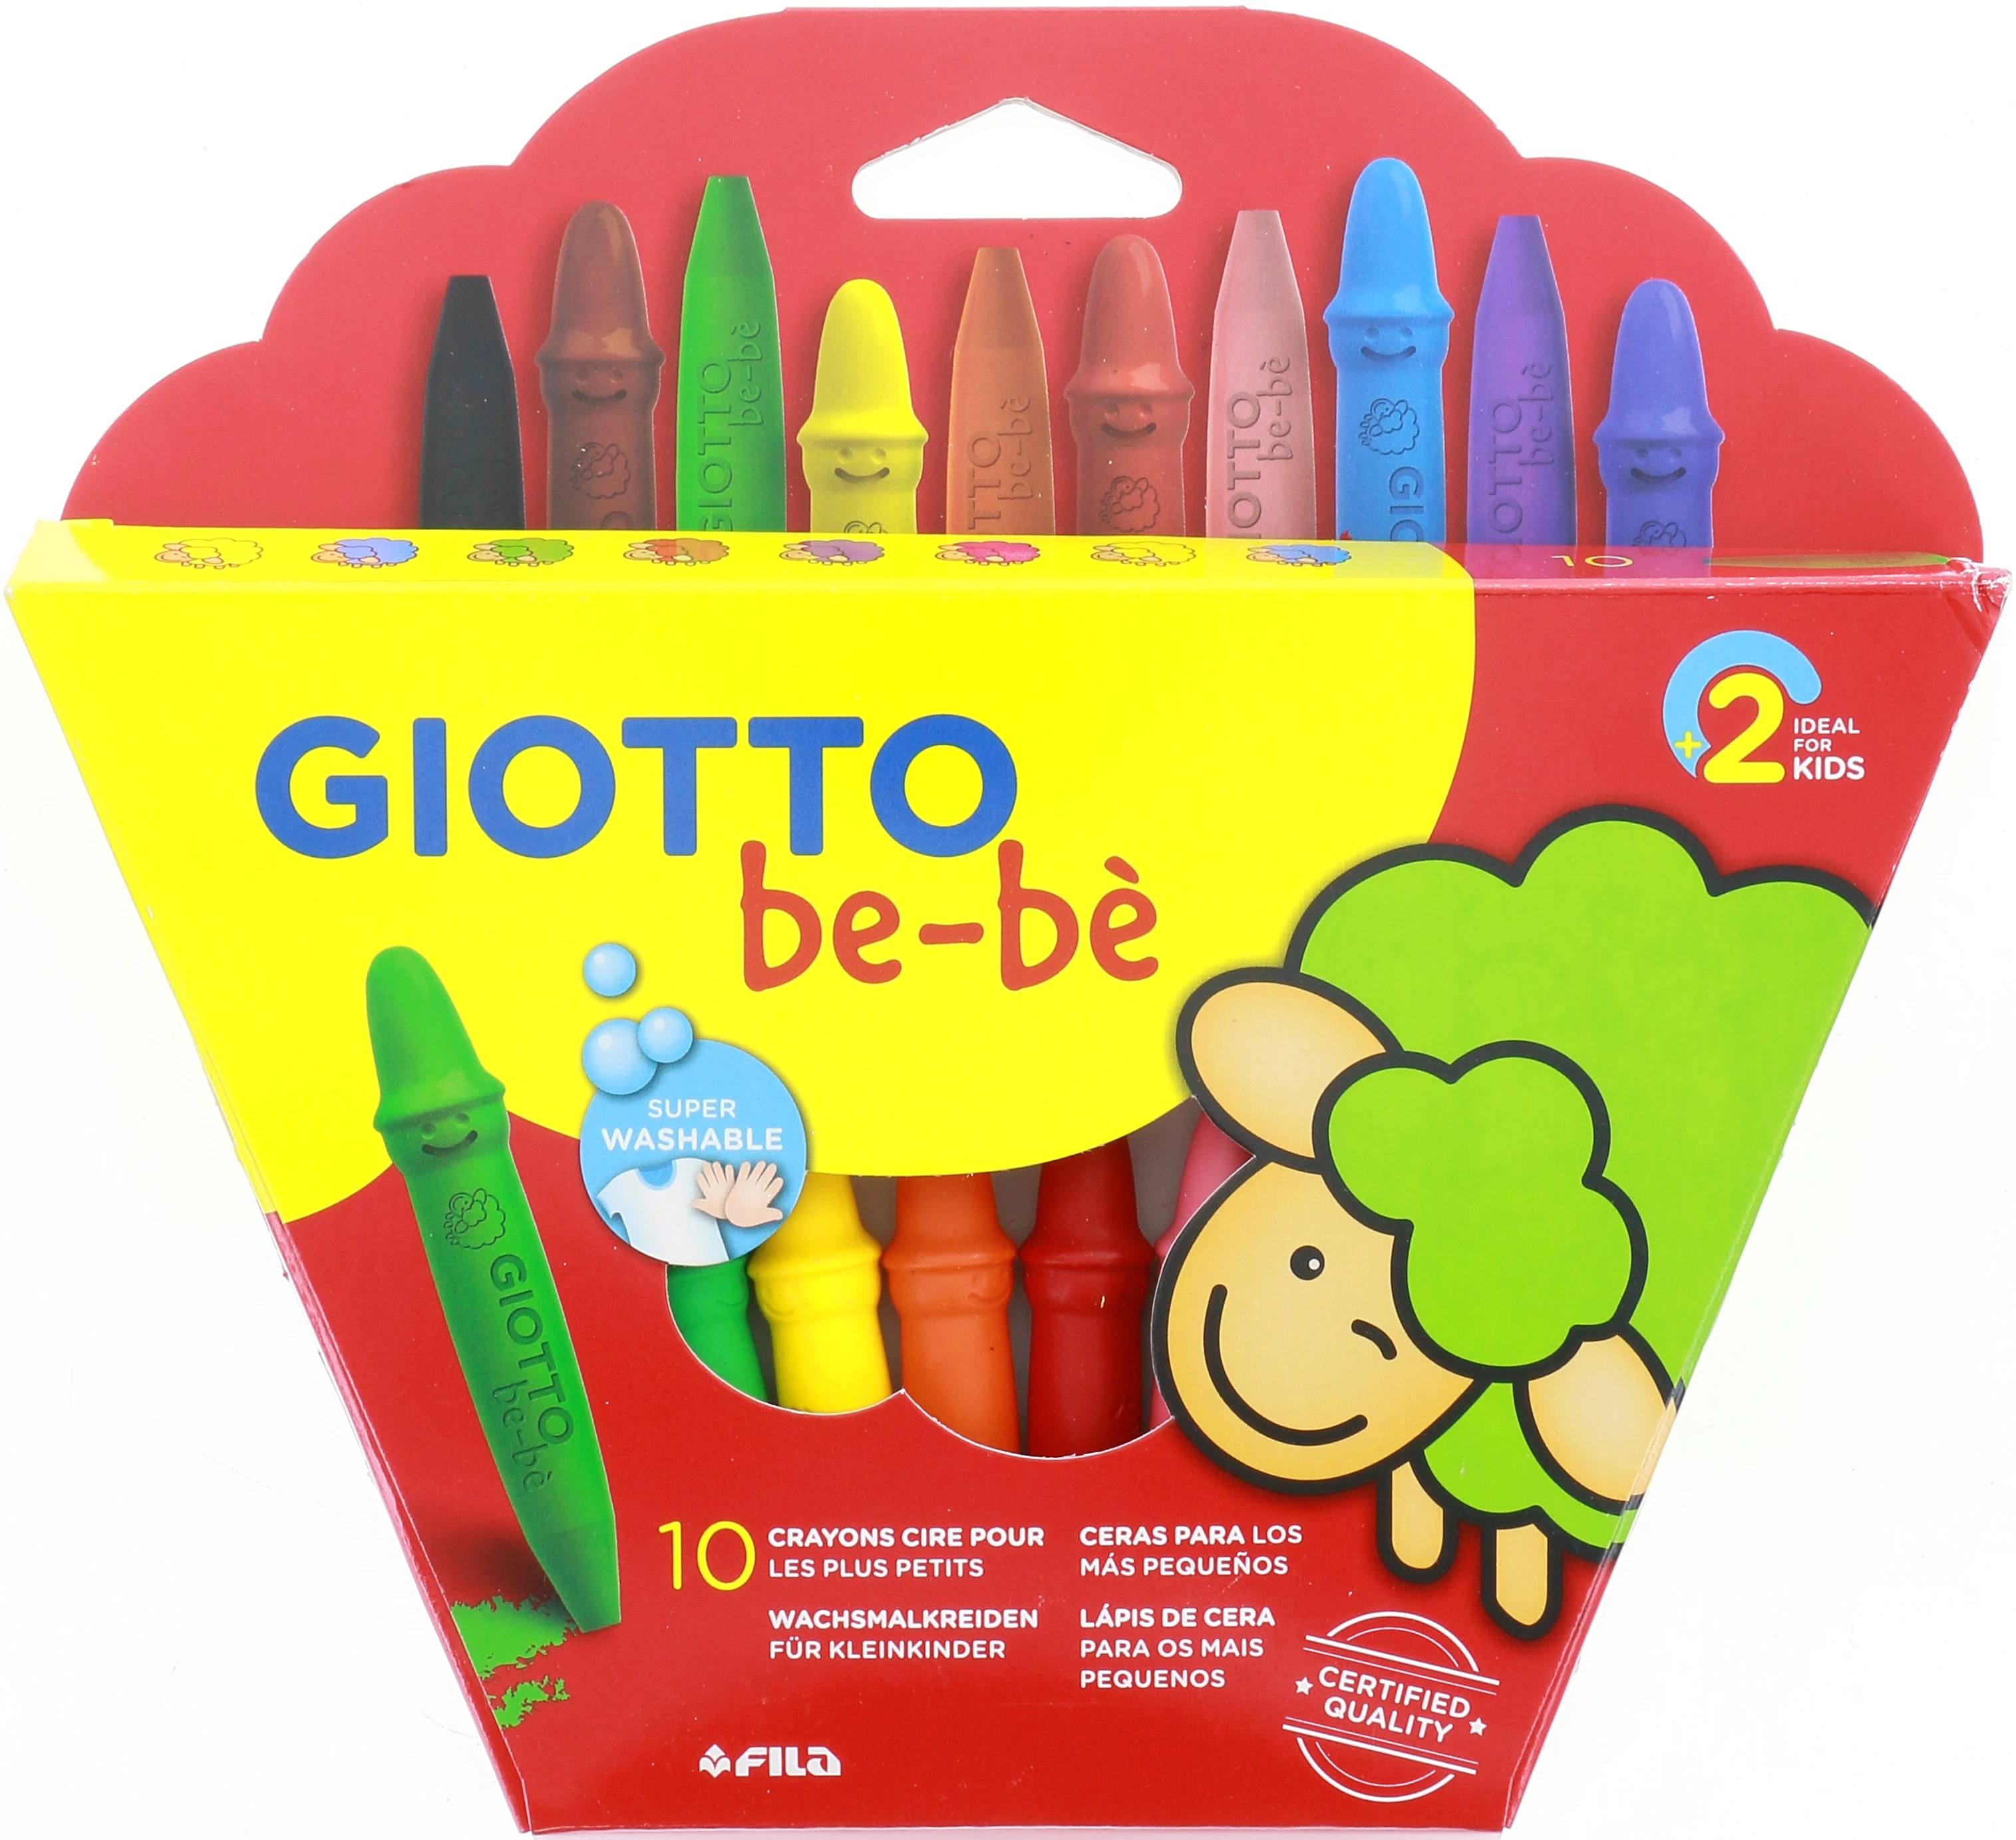 10 Crayons Cire 1 Taille-cra